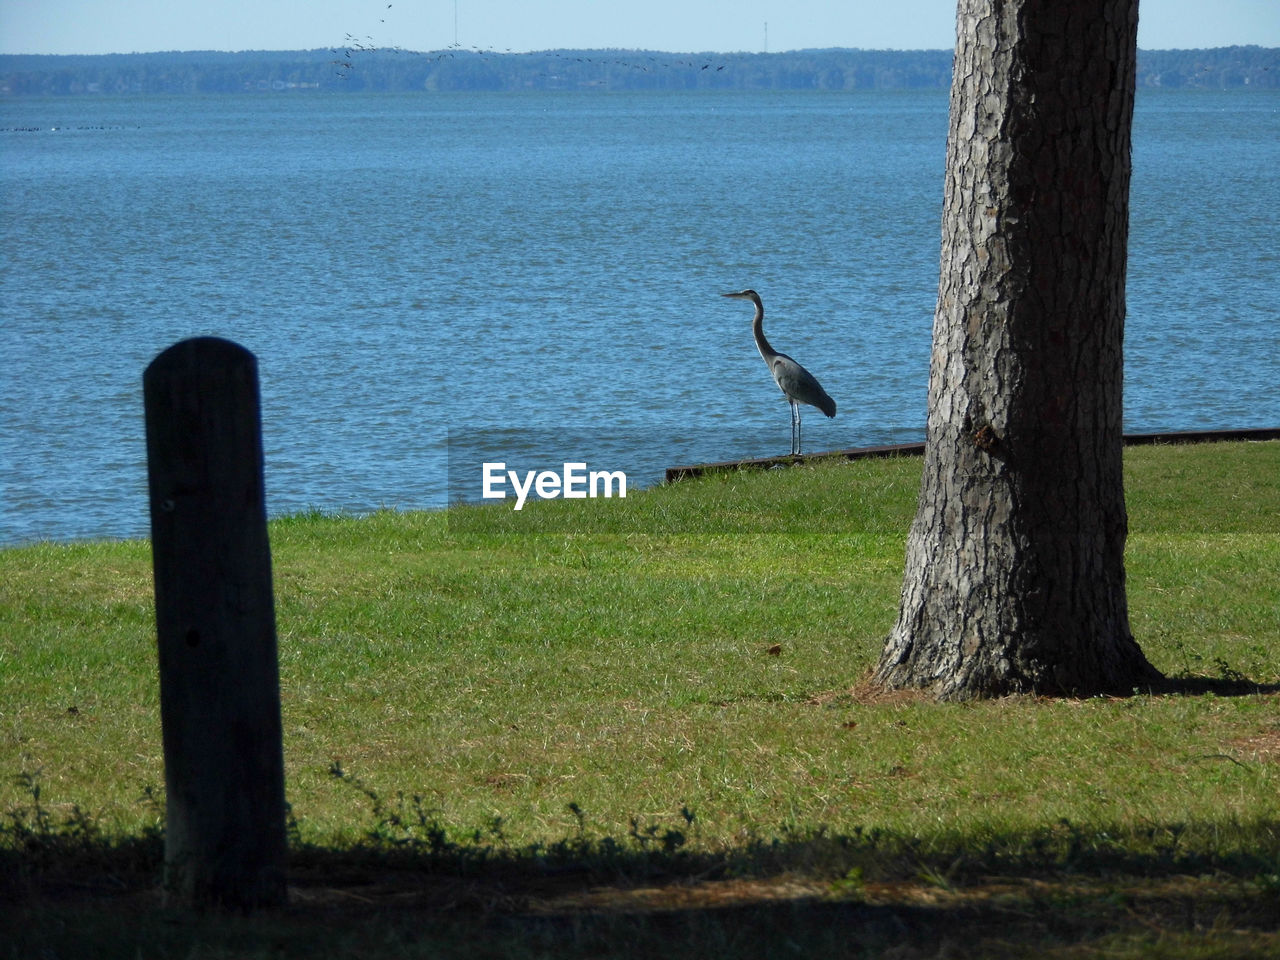 BIRD PERCHING ON WOODEN POST BY LAKE